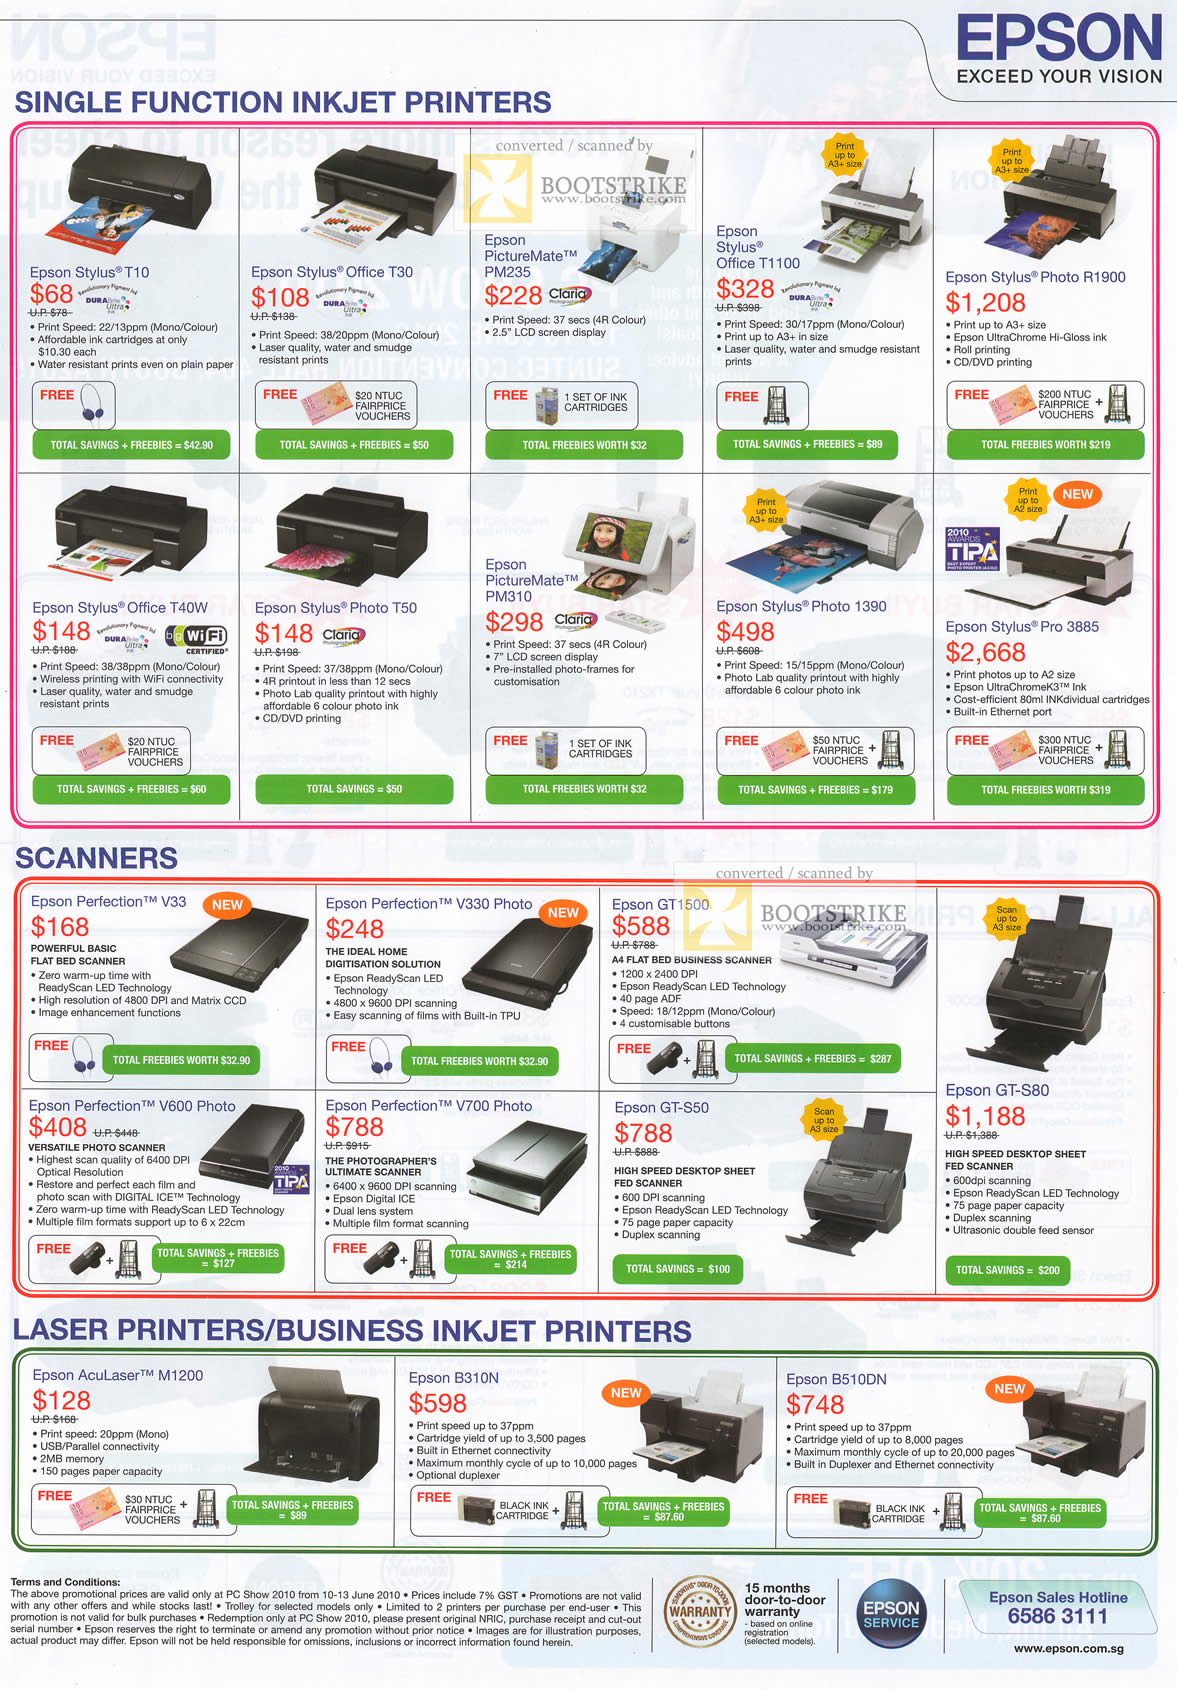 PC Show 2010 price list image brochure of Epson Inkjet Printers Stylus T10 T30 PictureMate PM235 Office Photo Scanners Perfection V330 GT1500 Laser Business AcuLaser